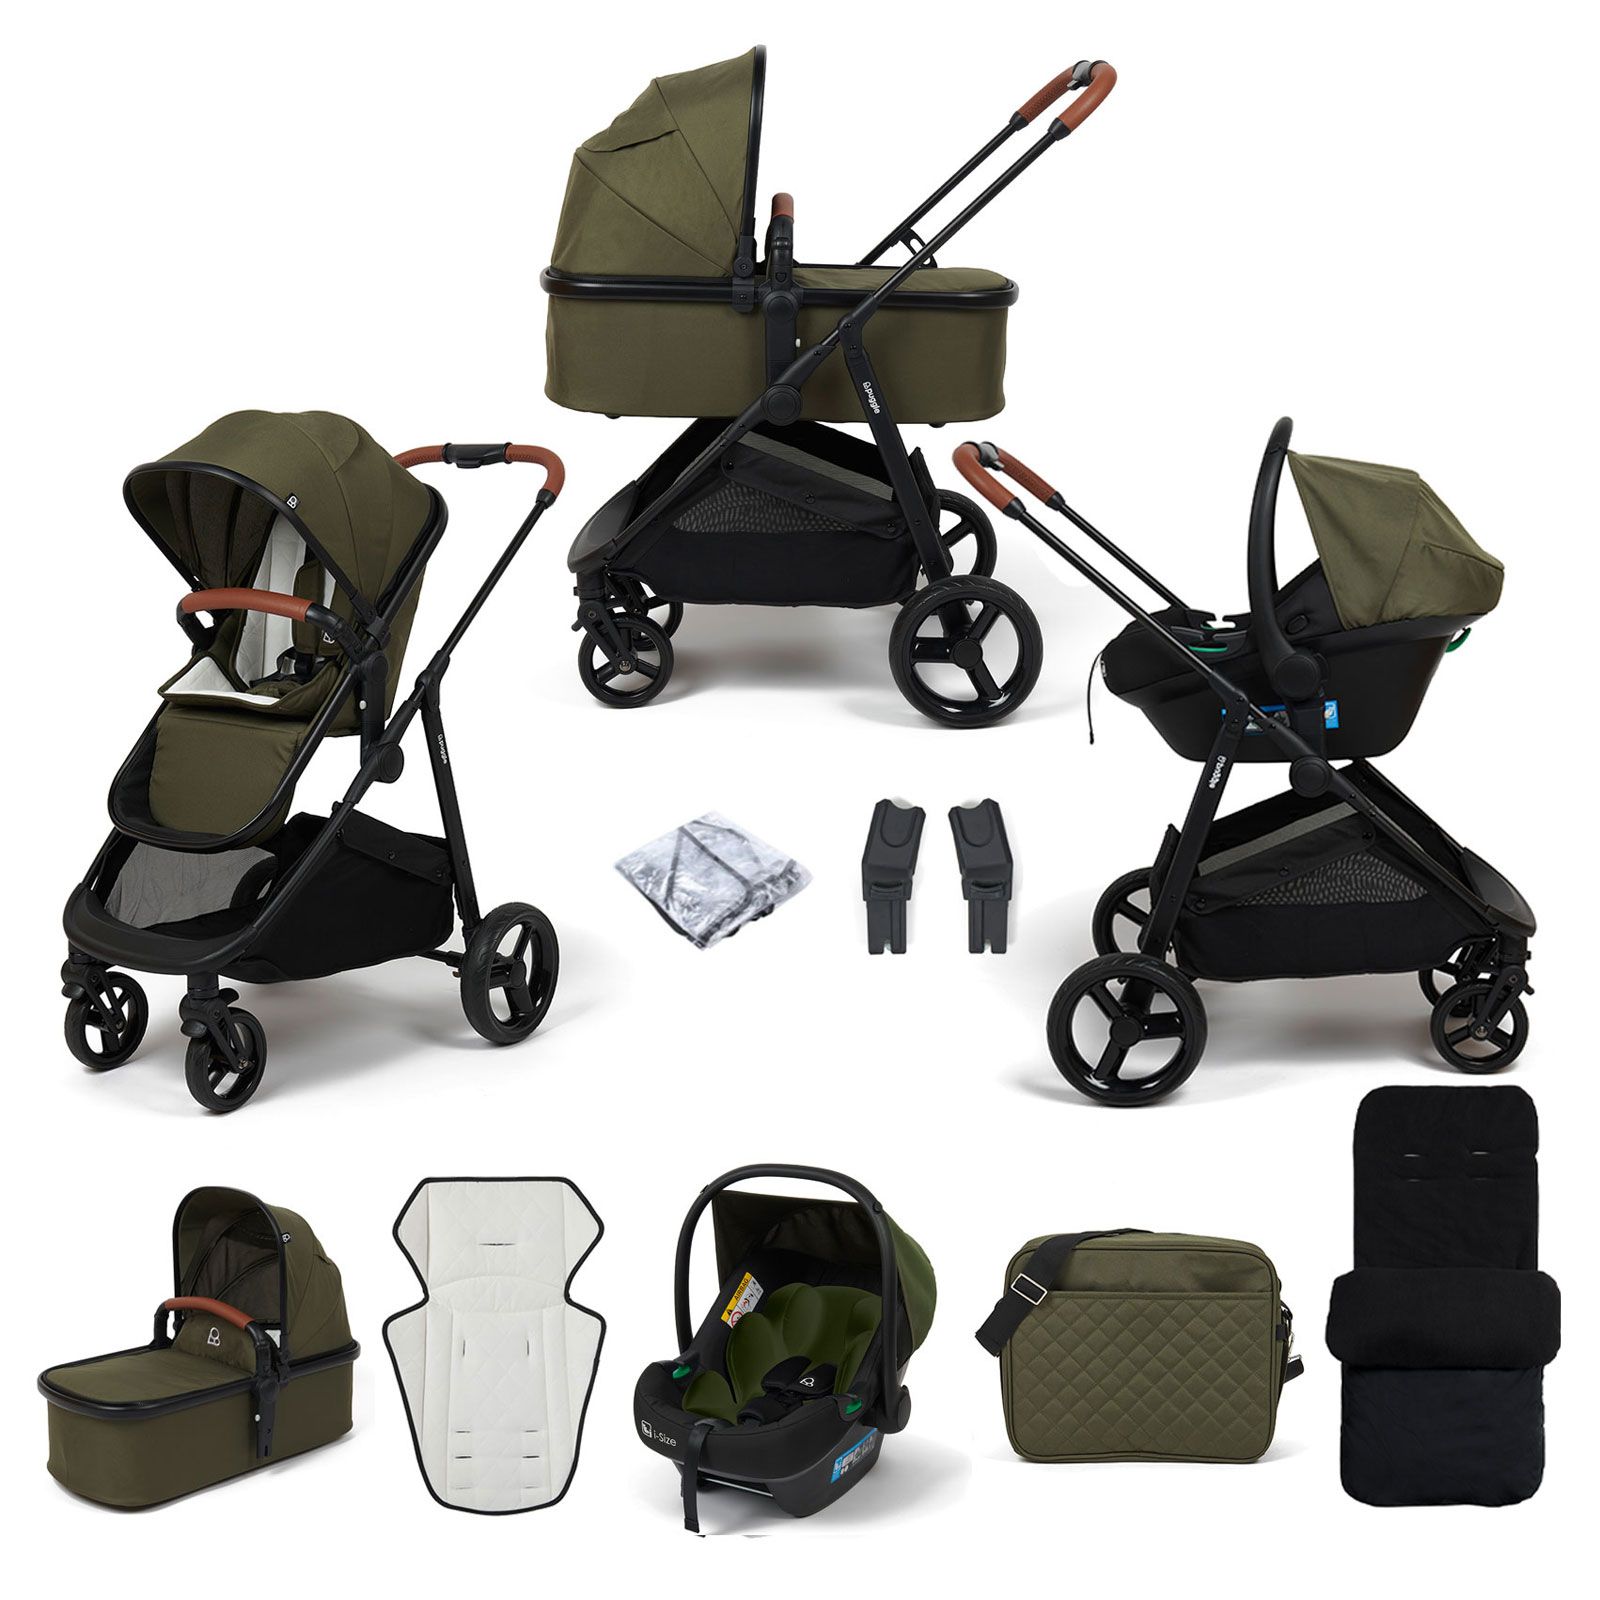 Puggle Monaco XT 3in1 i-Size Travel System with Changing Bag & Deluxe Footmuff - Forest Green